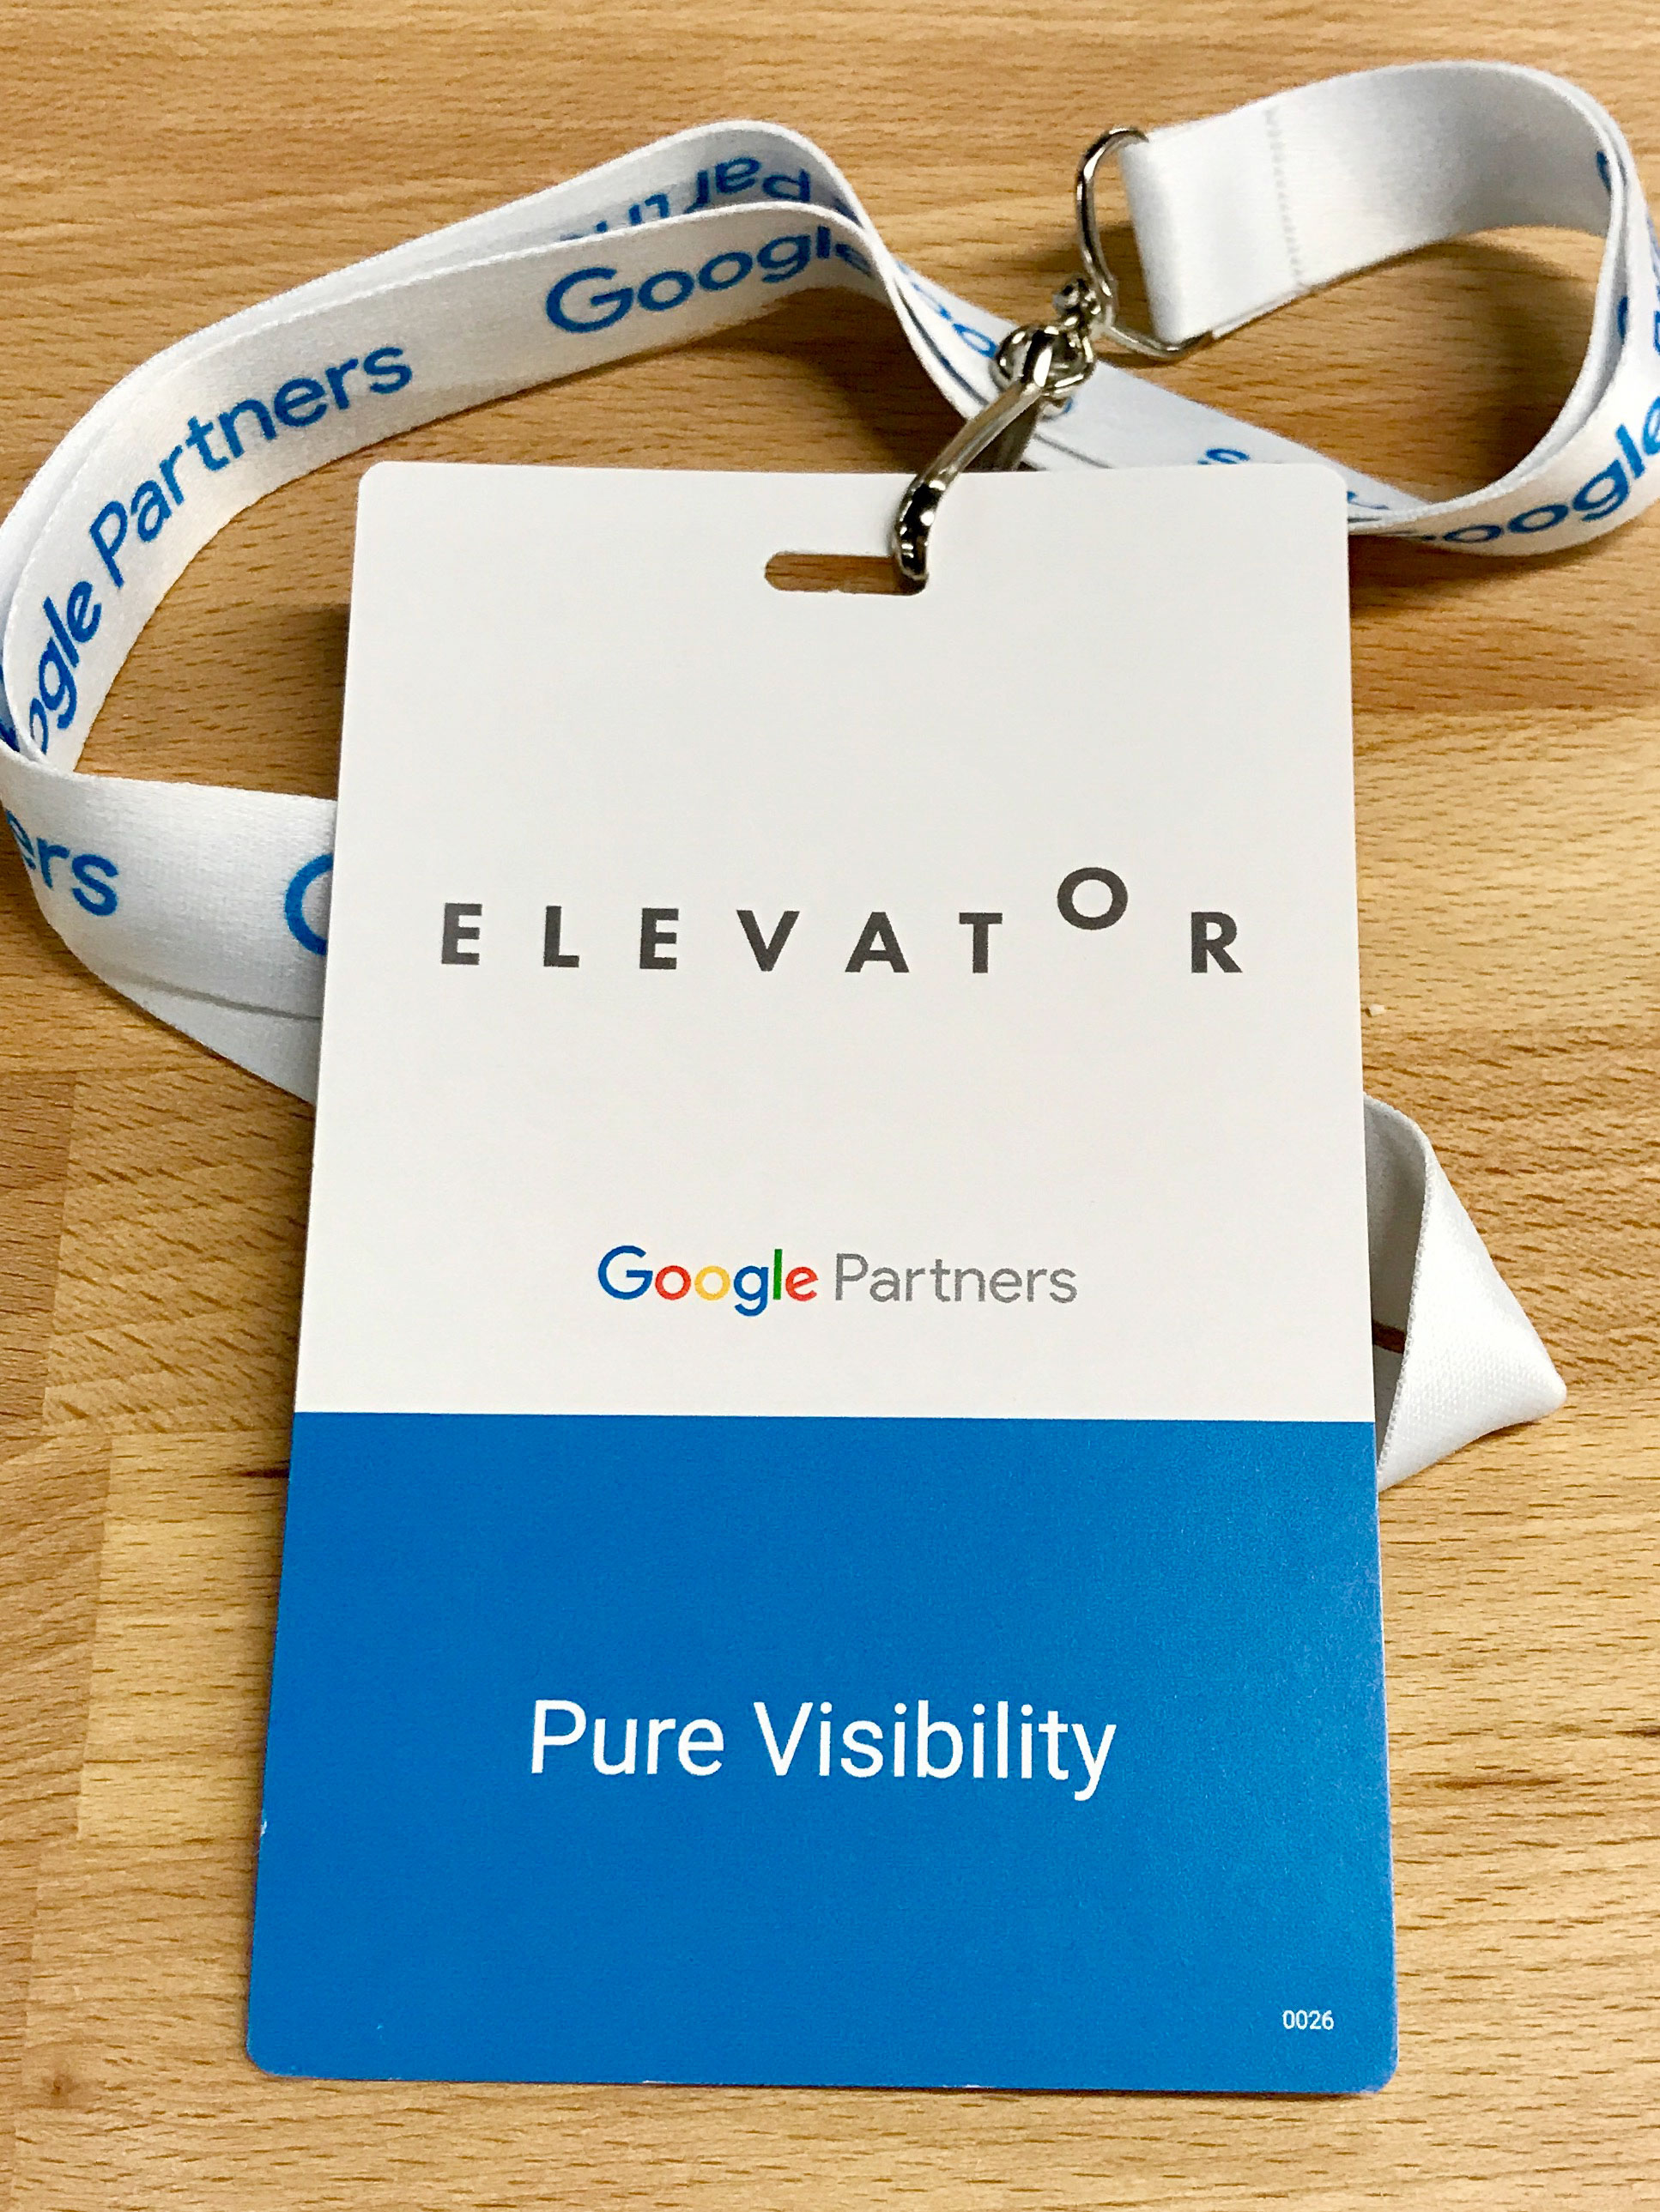 Linda Girard, CEO of Pure Visibility, will be participating in Google's exclusive Elevator program.